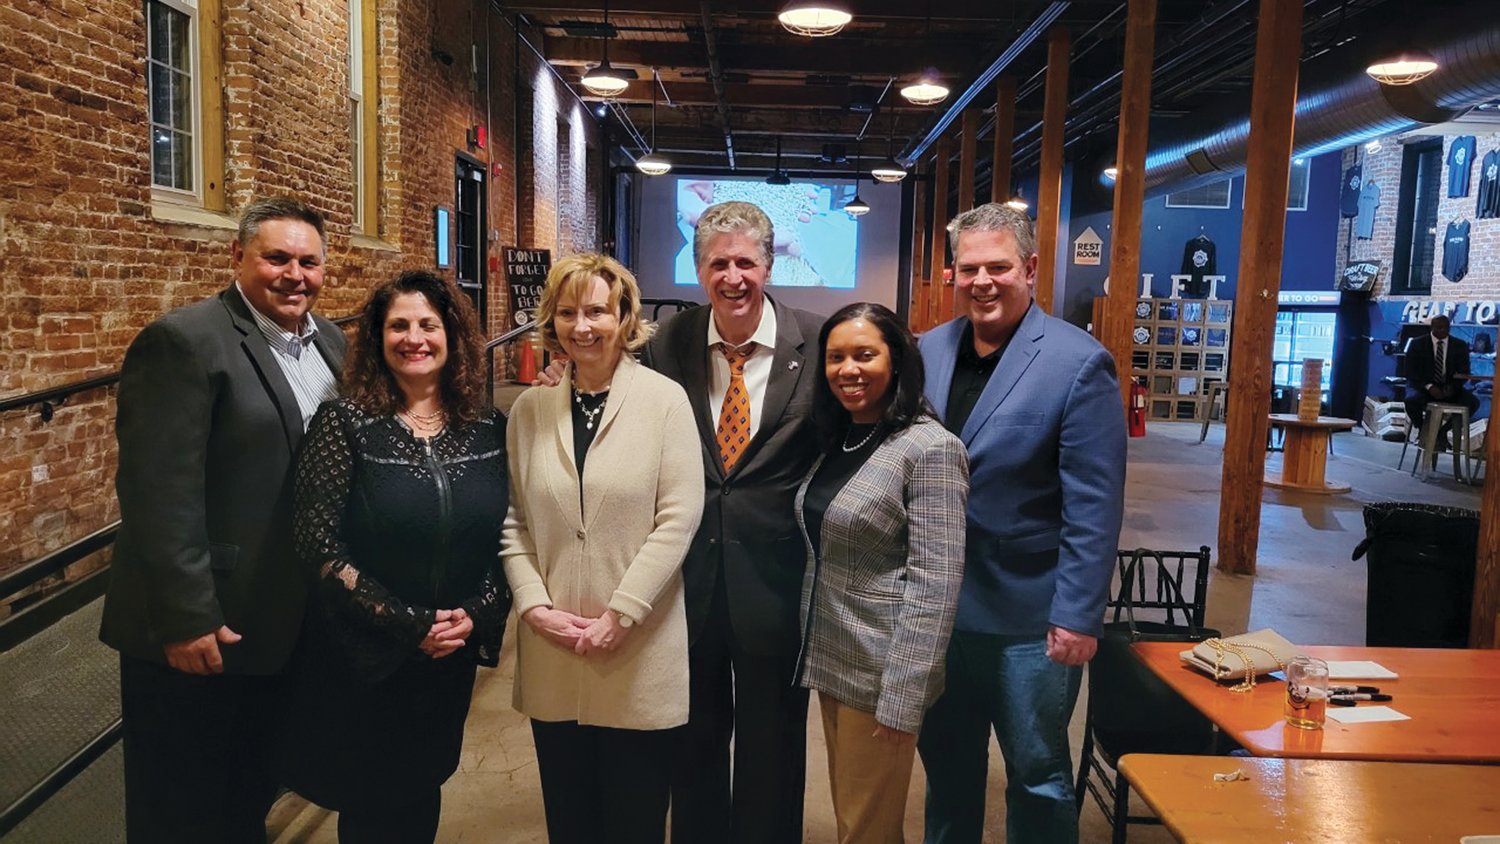 PARTY PEOPLE: Gov. Dan McKee and First Lady Susan McKee are joined by Johnston Democratic Committee Chairman Richard DelFino and his wife Deborah of Johnston, Lt. Gov. Sabina Matos and her husband Patrick Ward during last week’s unique networking night inside The Guild Brewery Pawtucket.